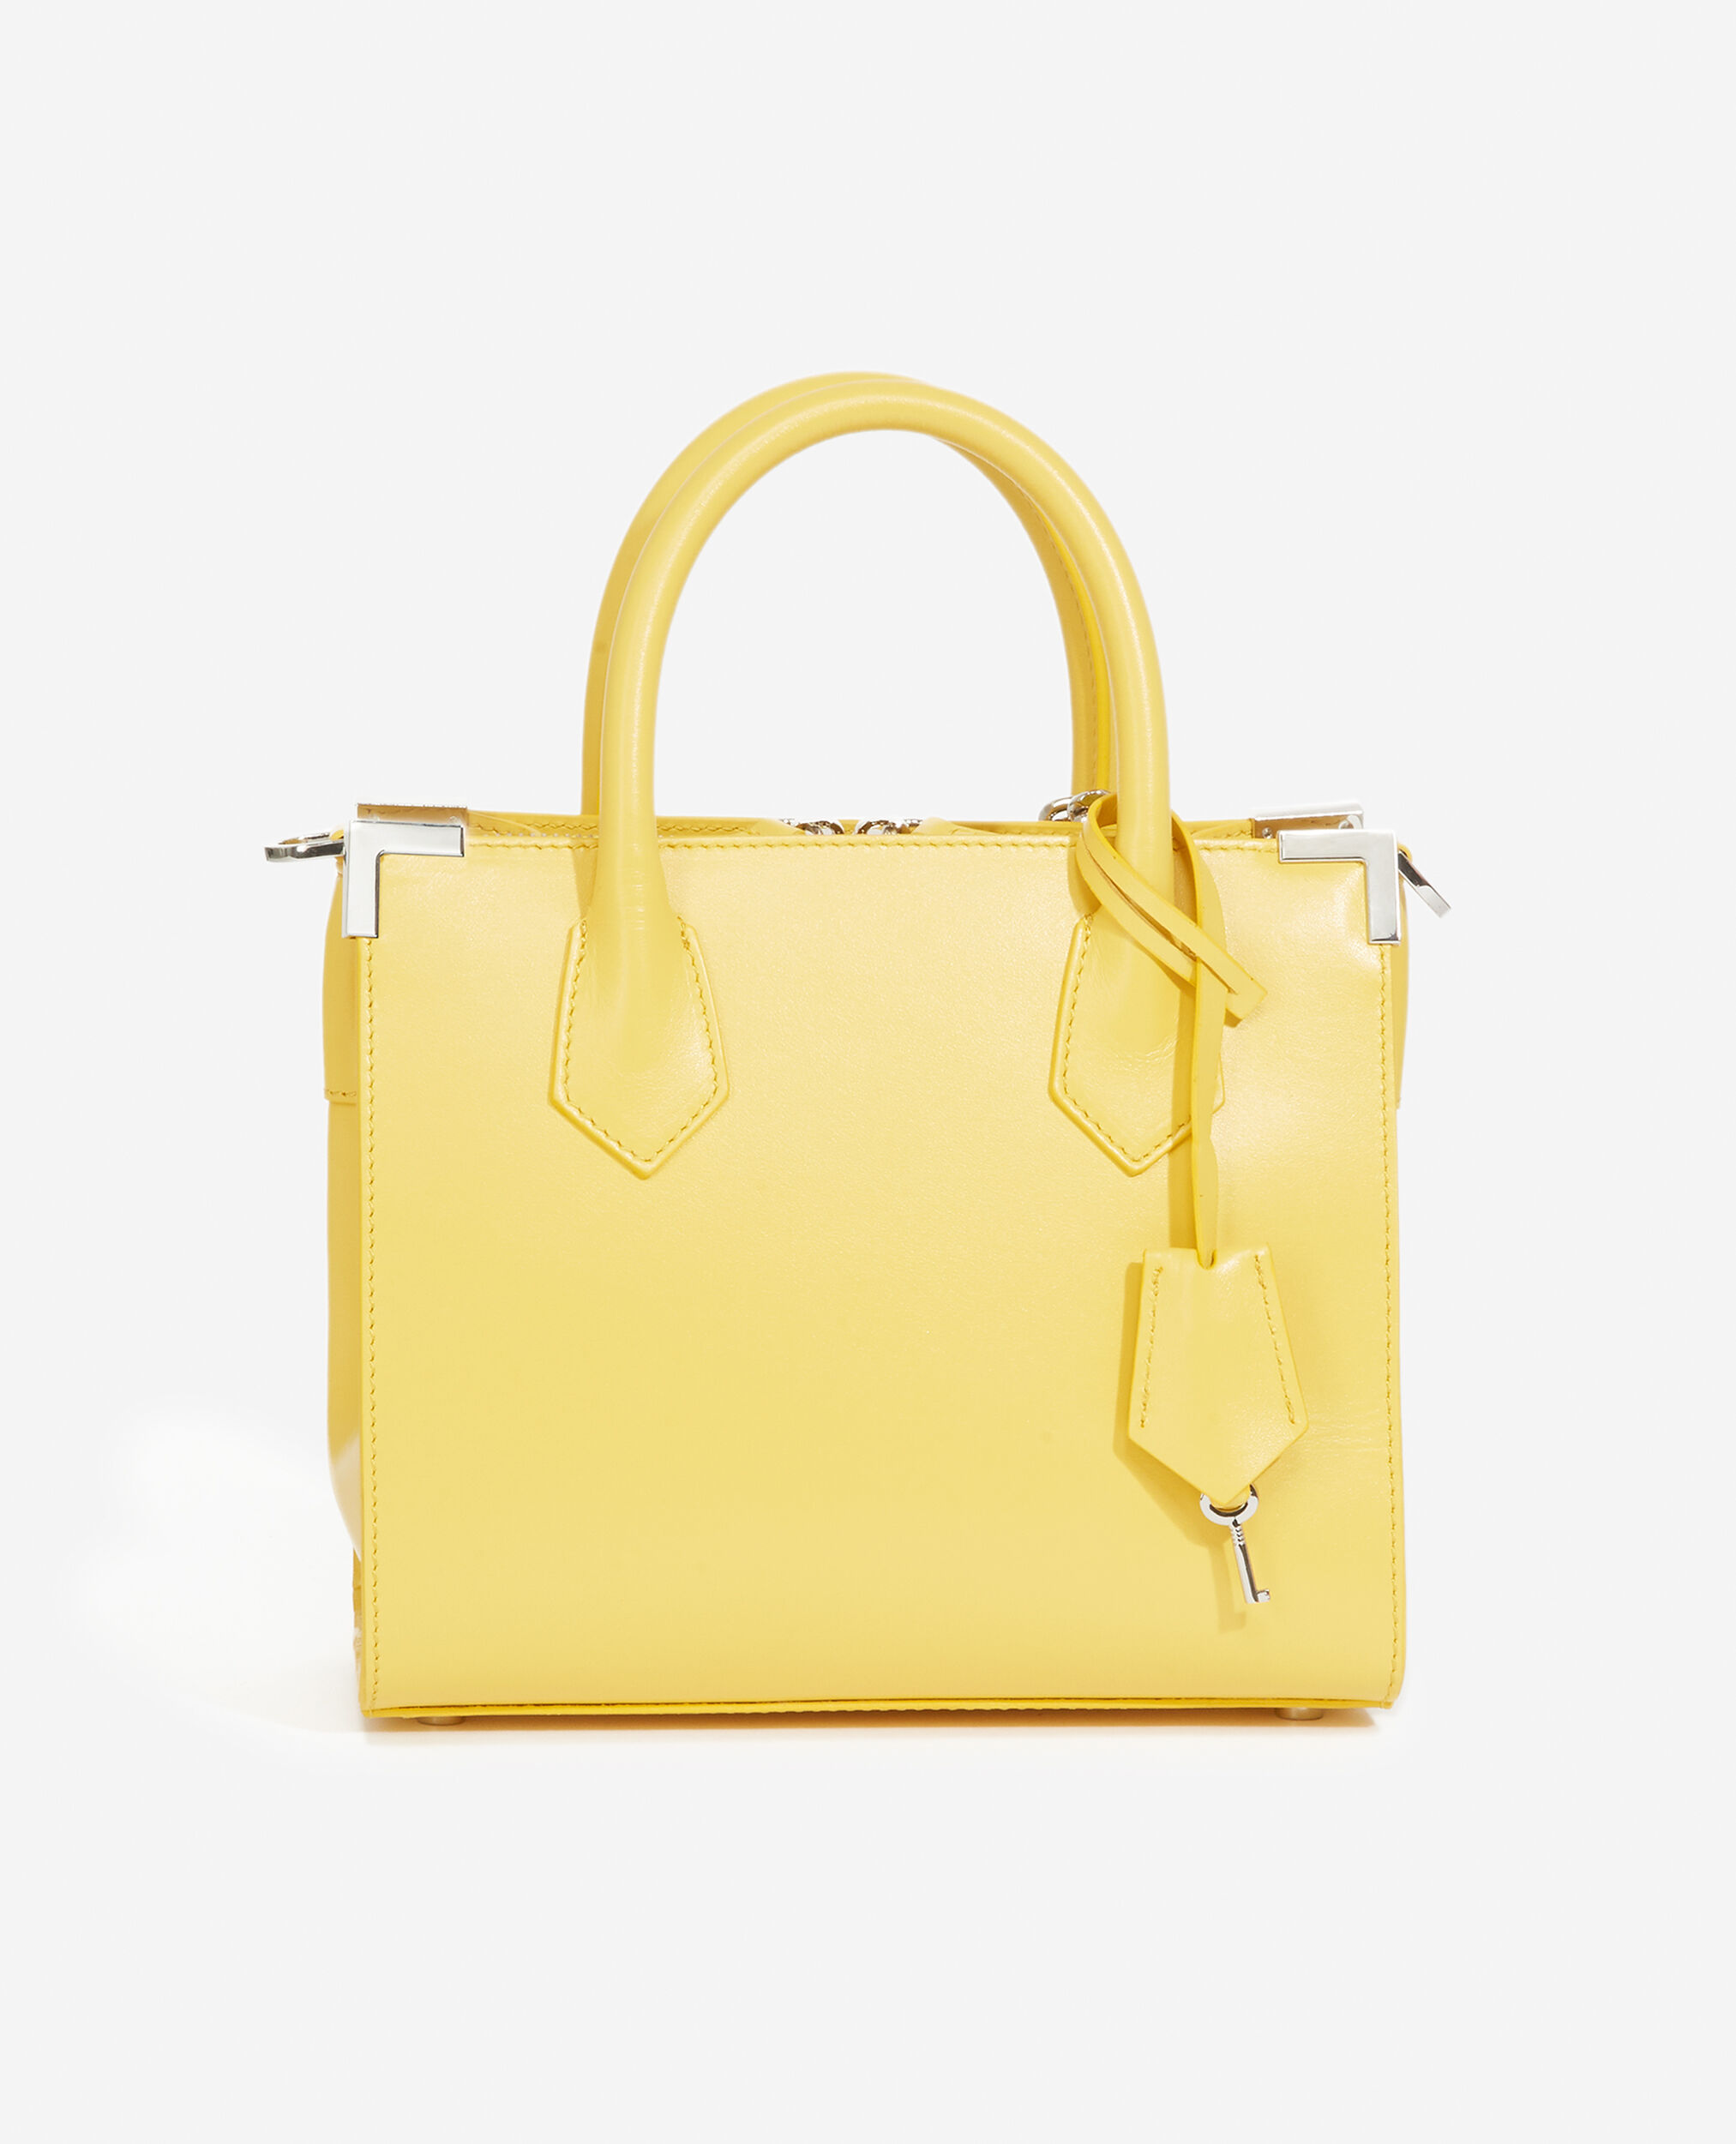 Medium Ming bag in pastel yellow leather, BRIGHT YELLOW, hi-res image number null